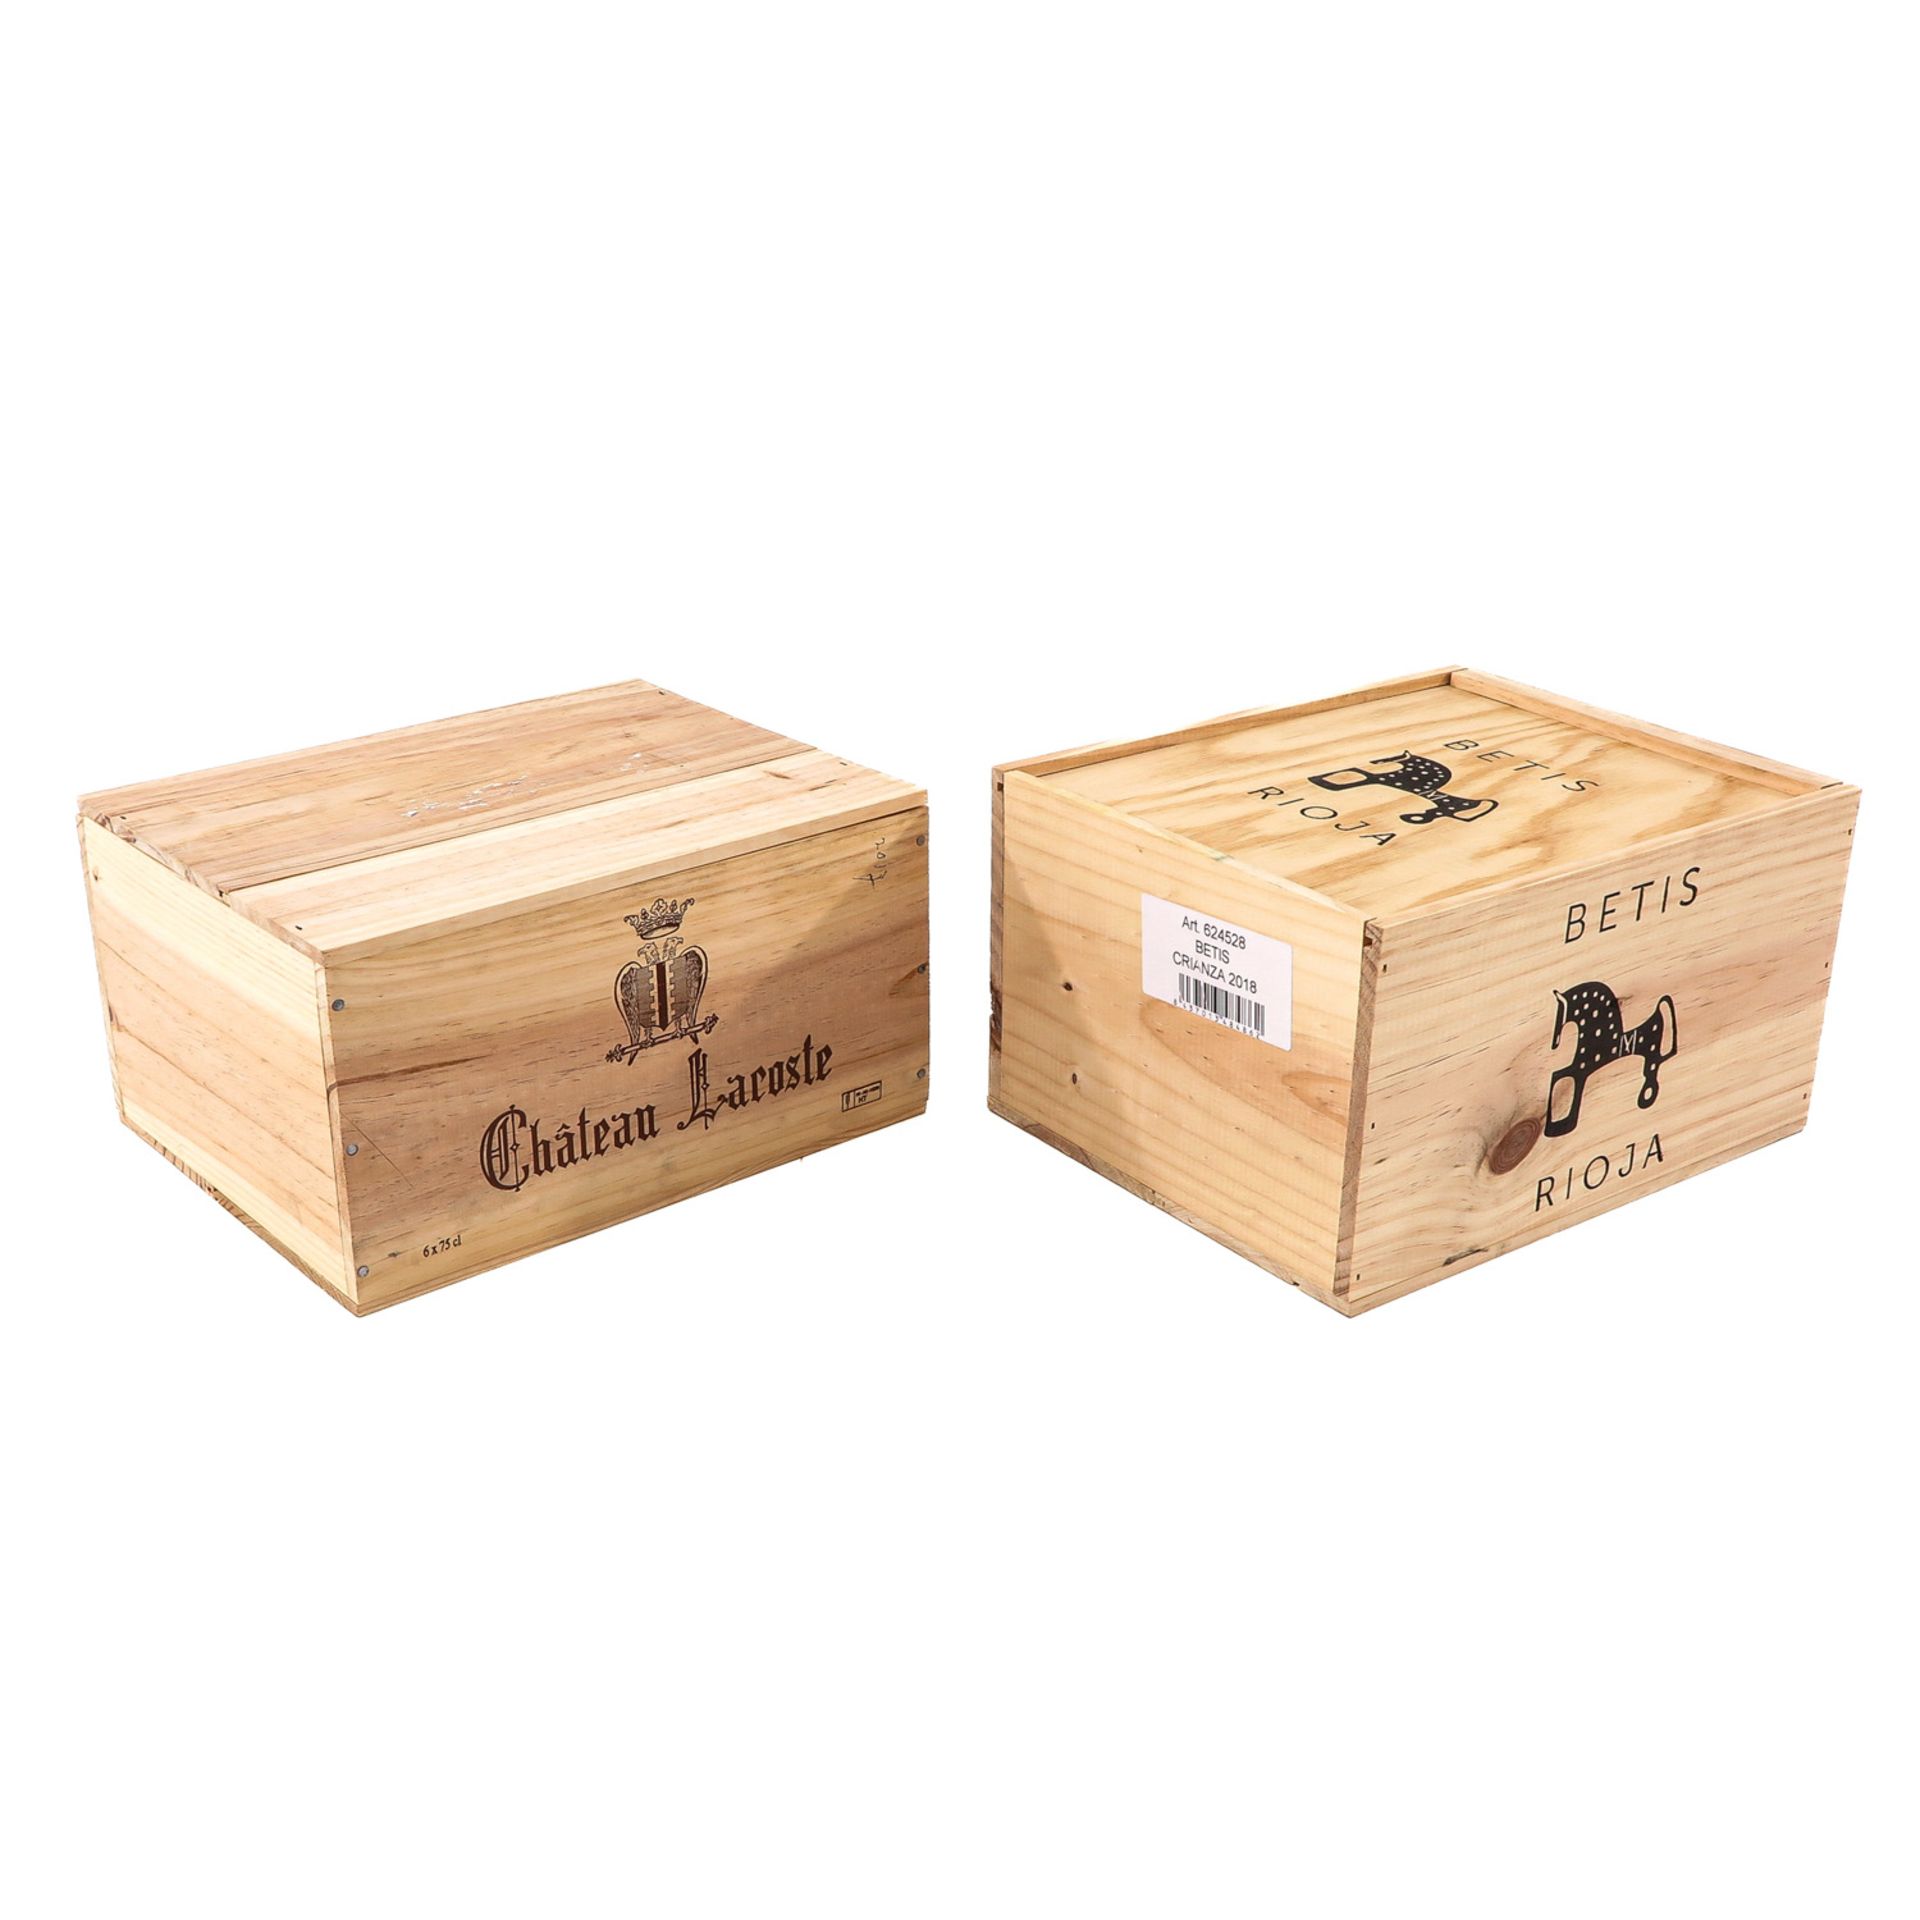 A Collection of 2 Crates of Wine